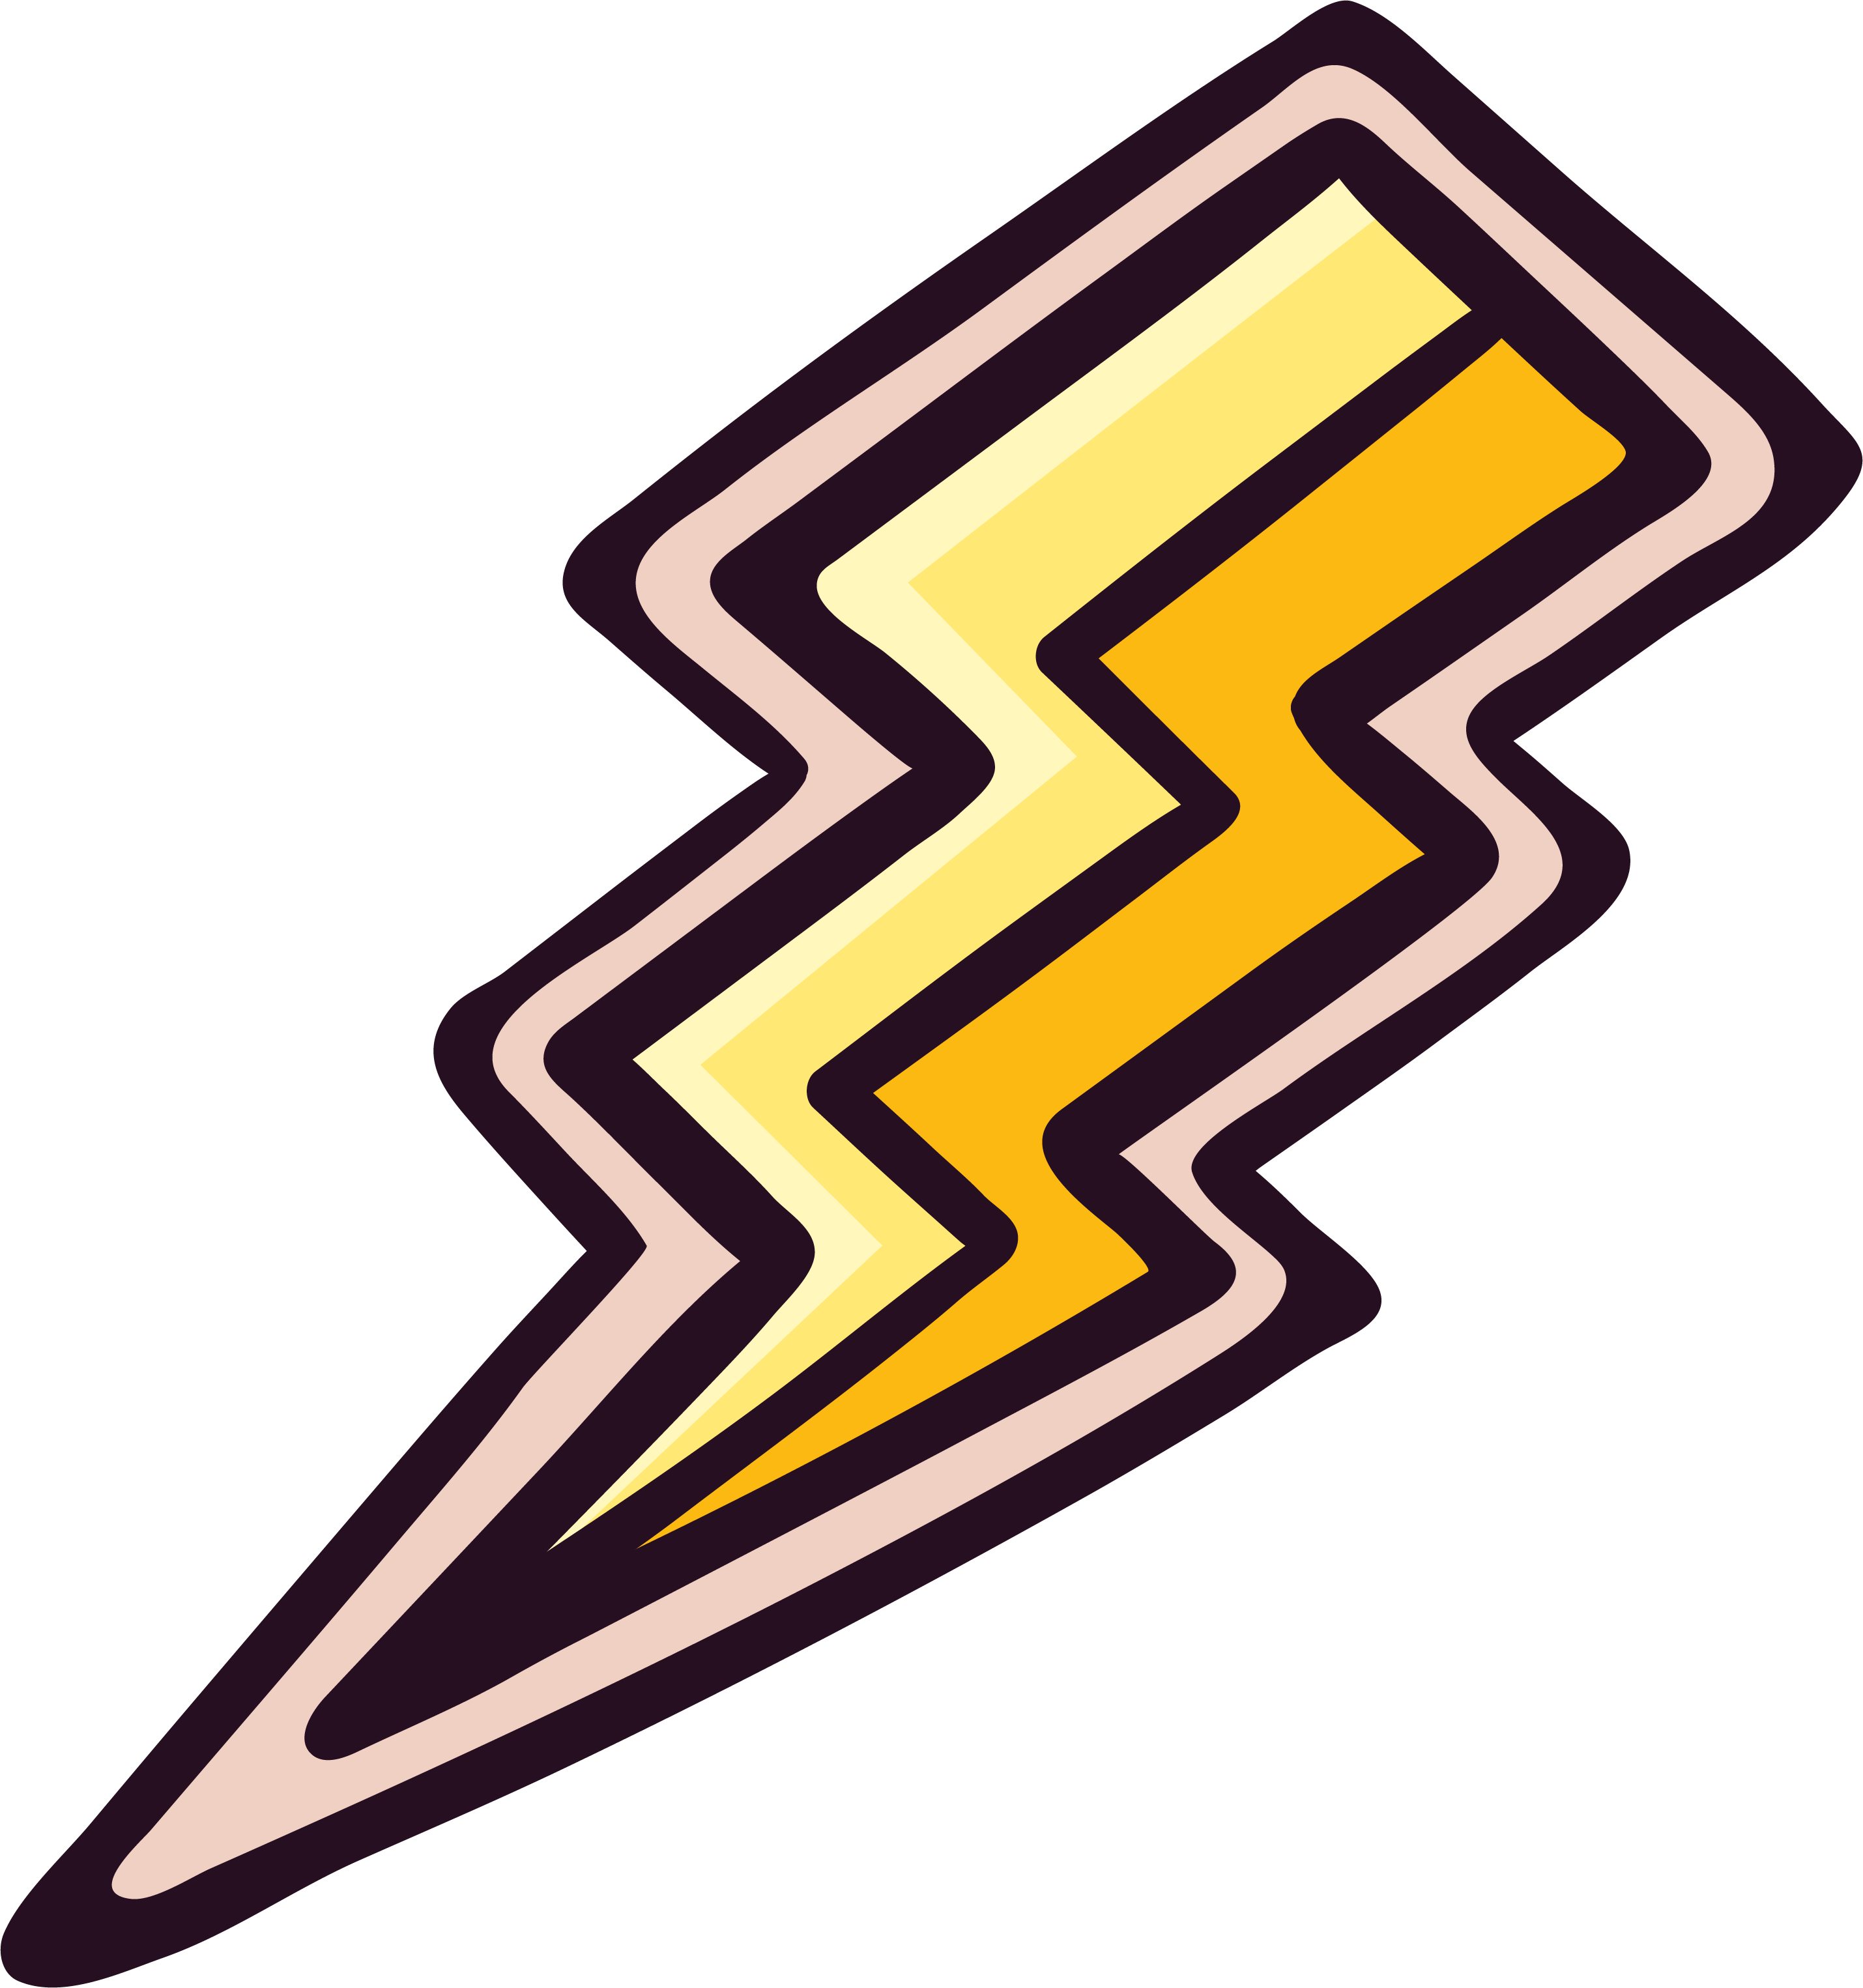 Stylized Thunderbolt Graphic PNG